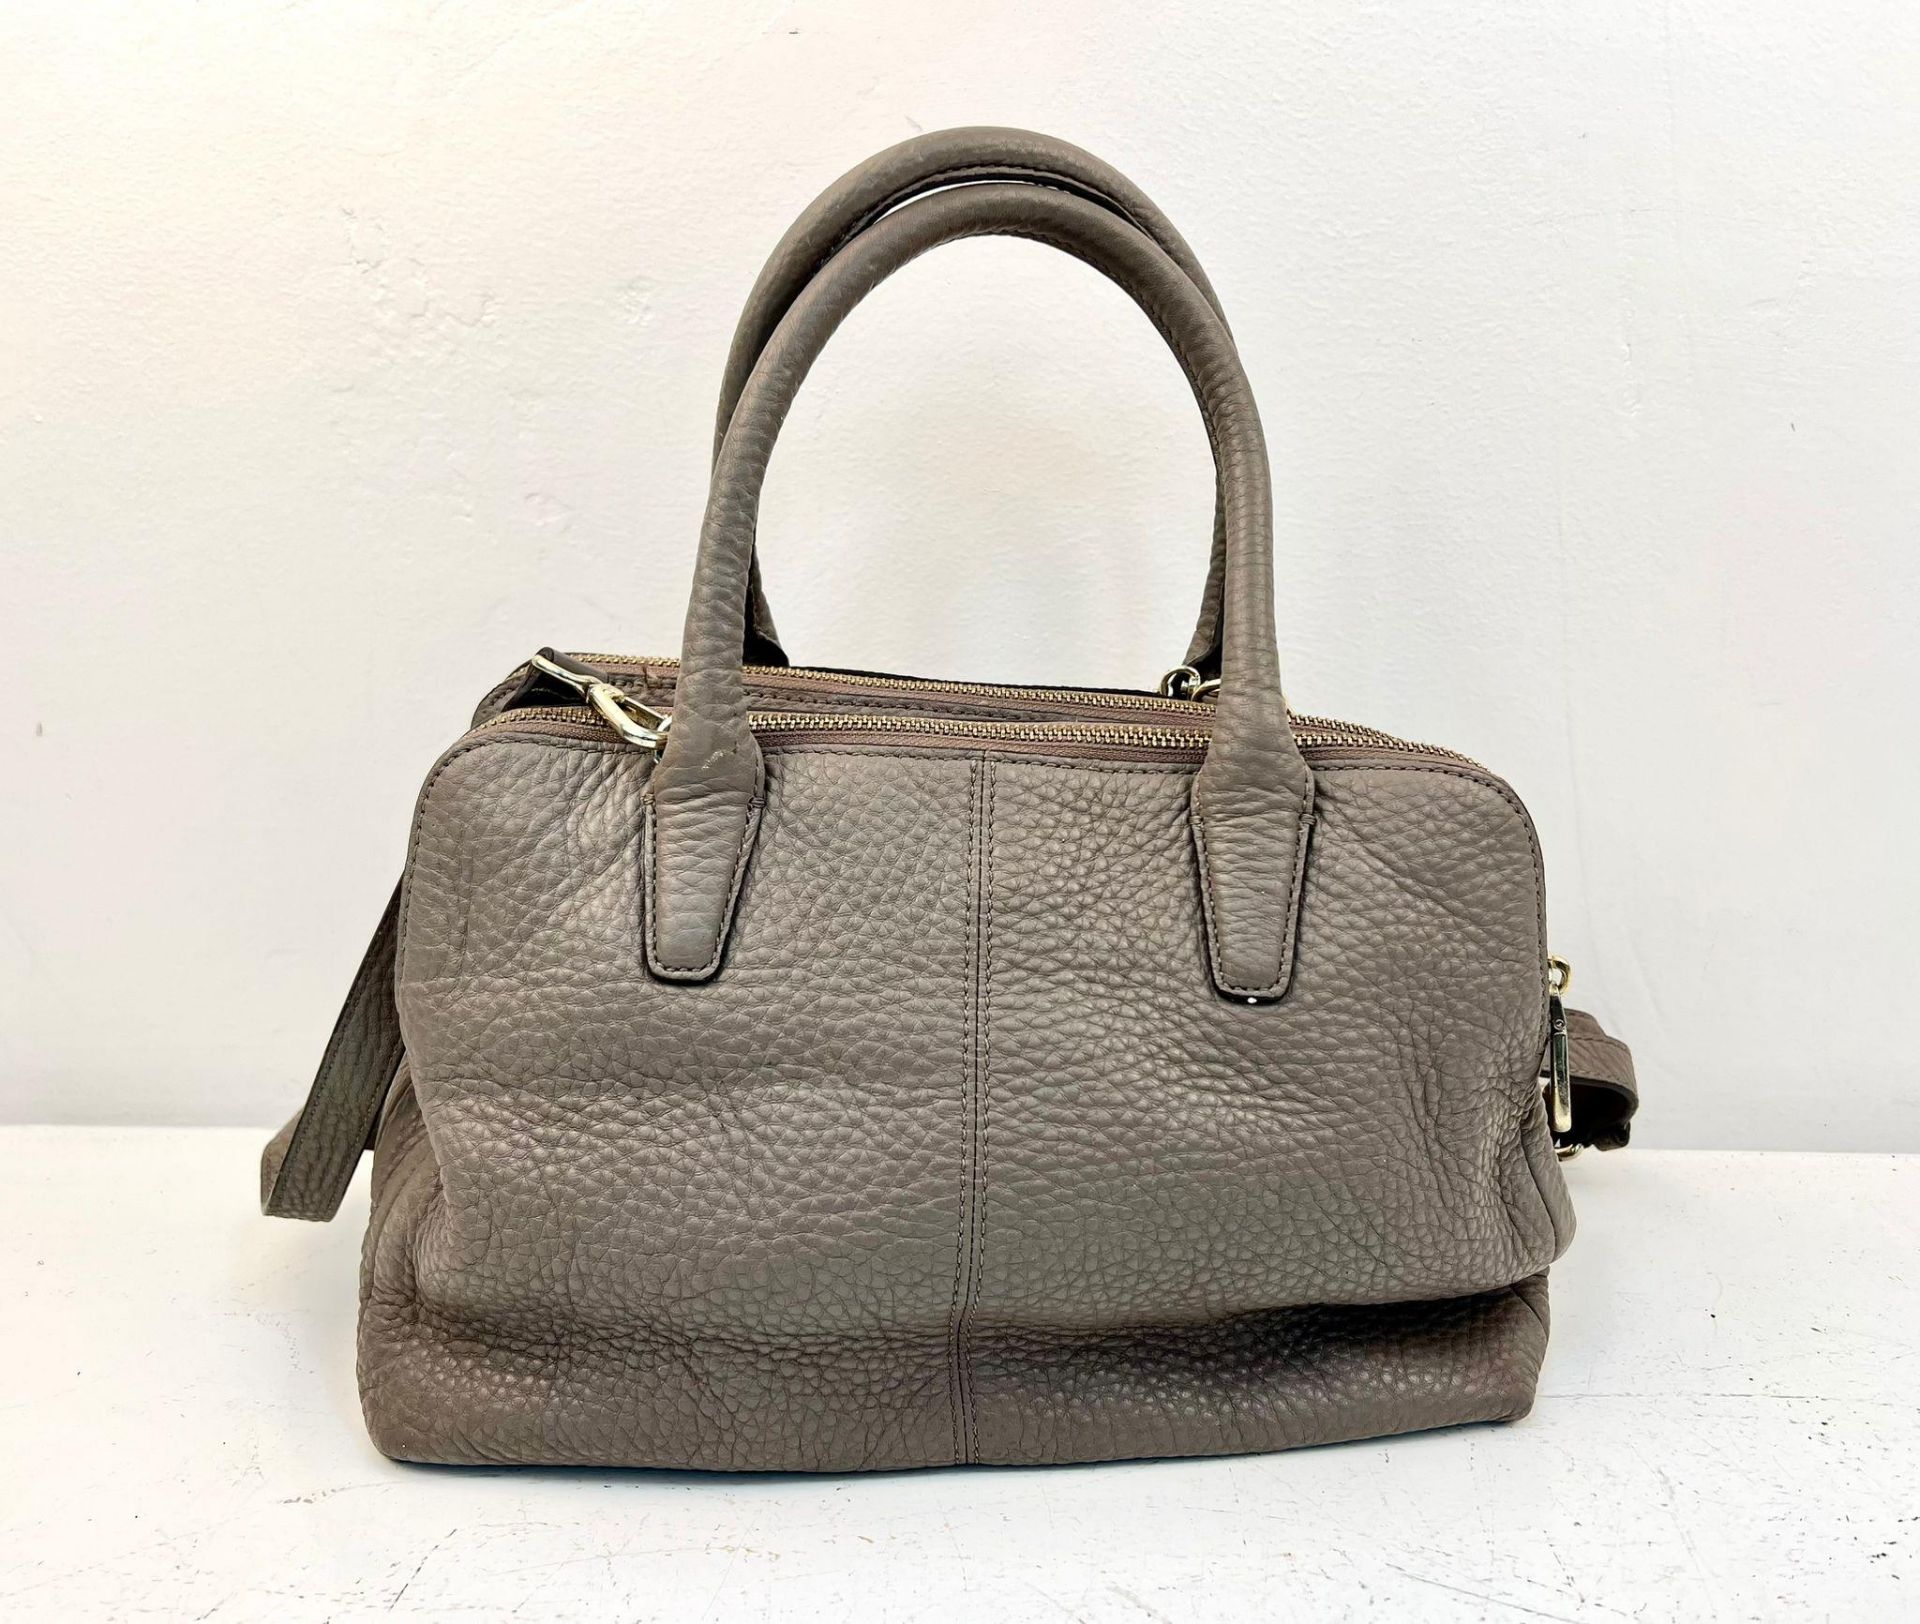 A DKNY Brown Leather Handbag with Shoulder Strap. Gold-tone hardware. Exterior zipped compartment. - Bild 5 aus 9